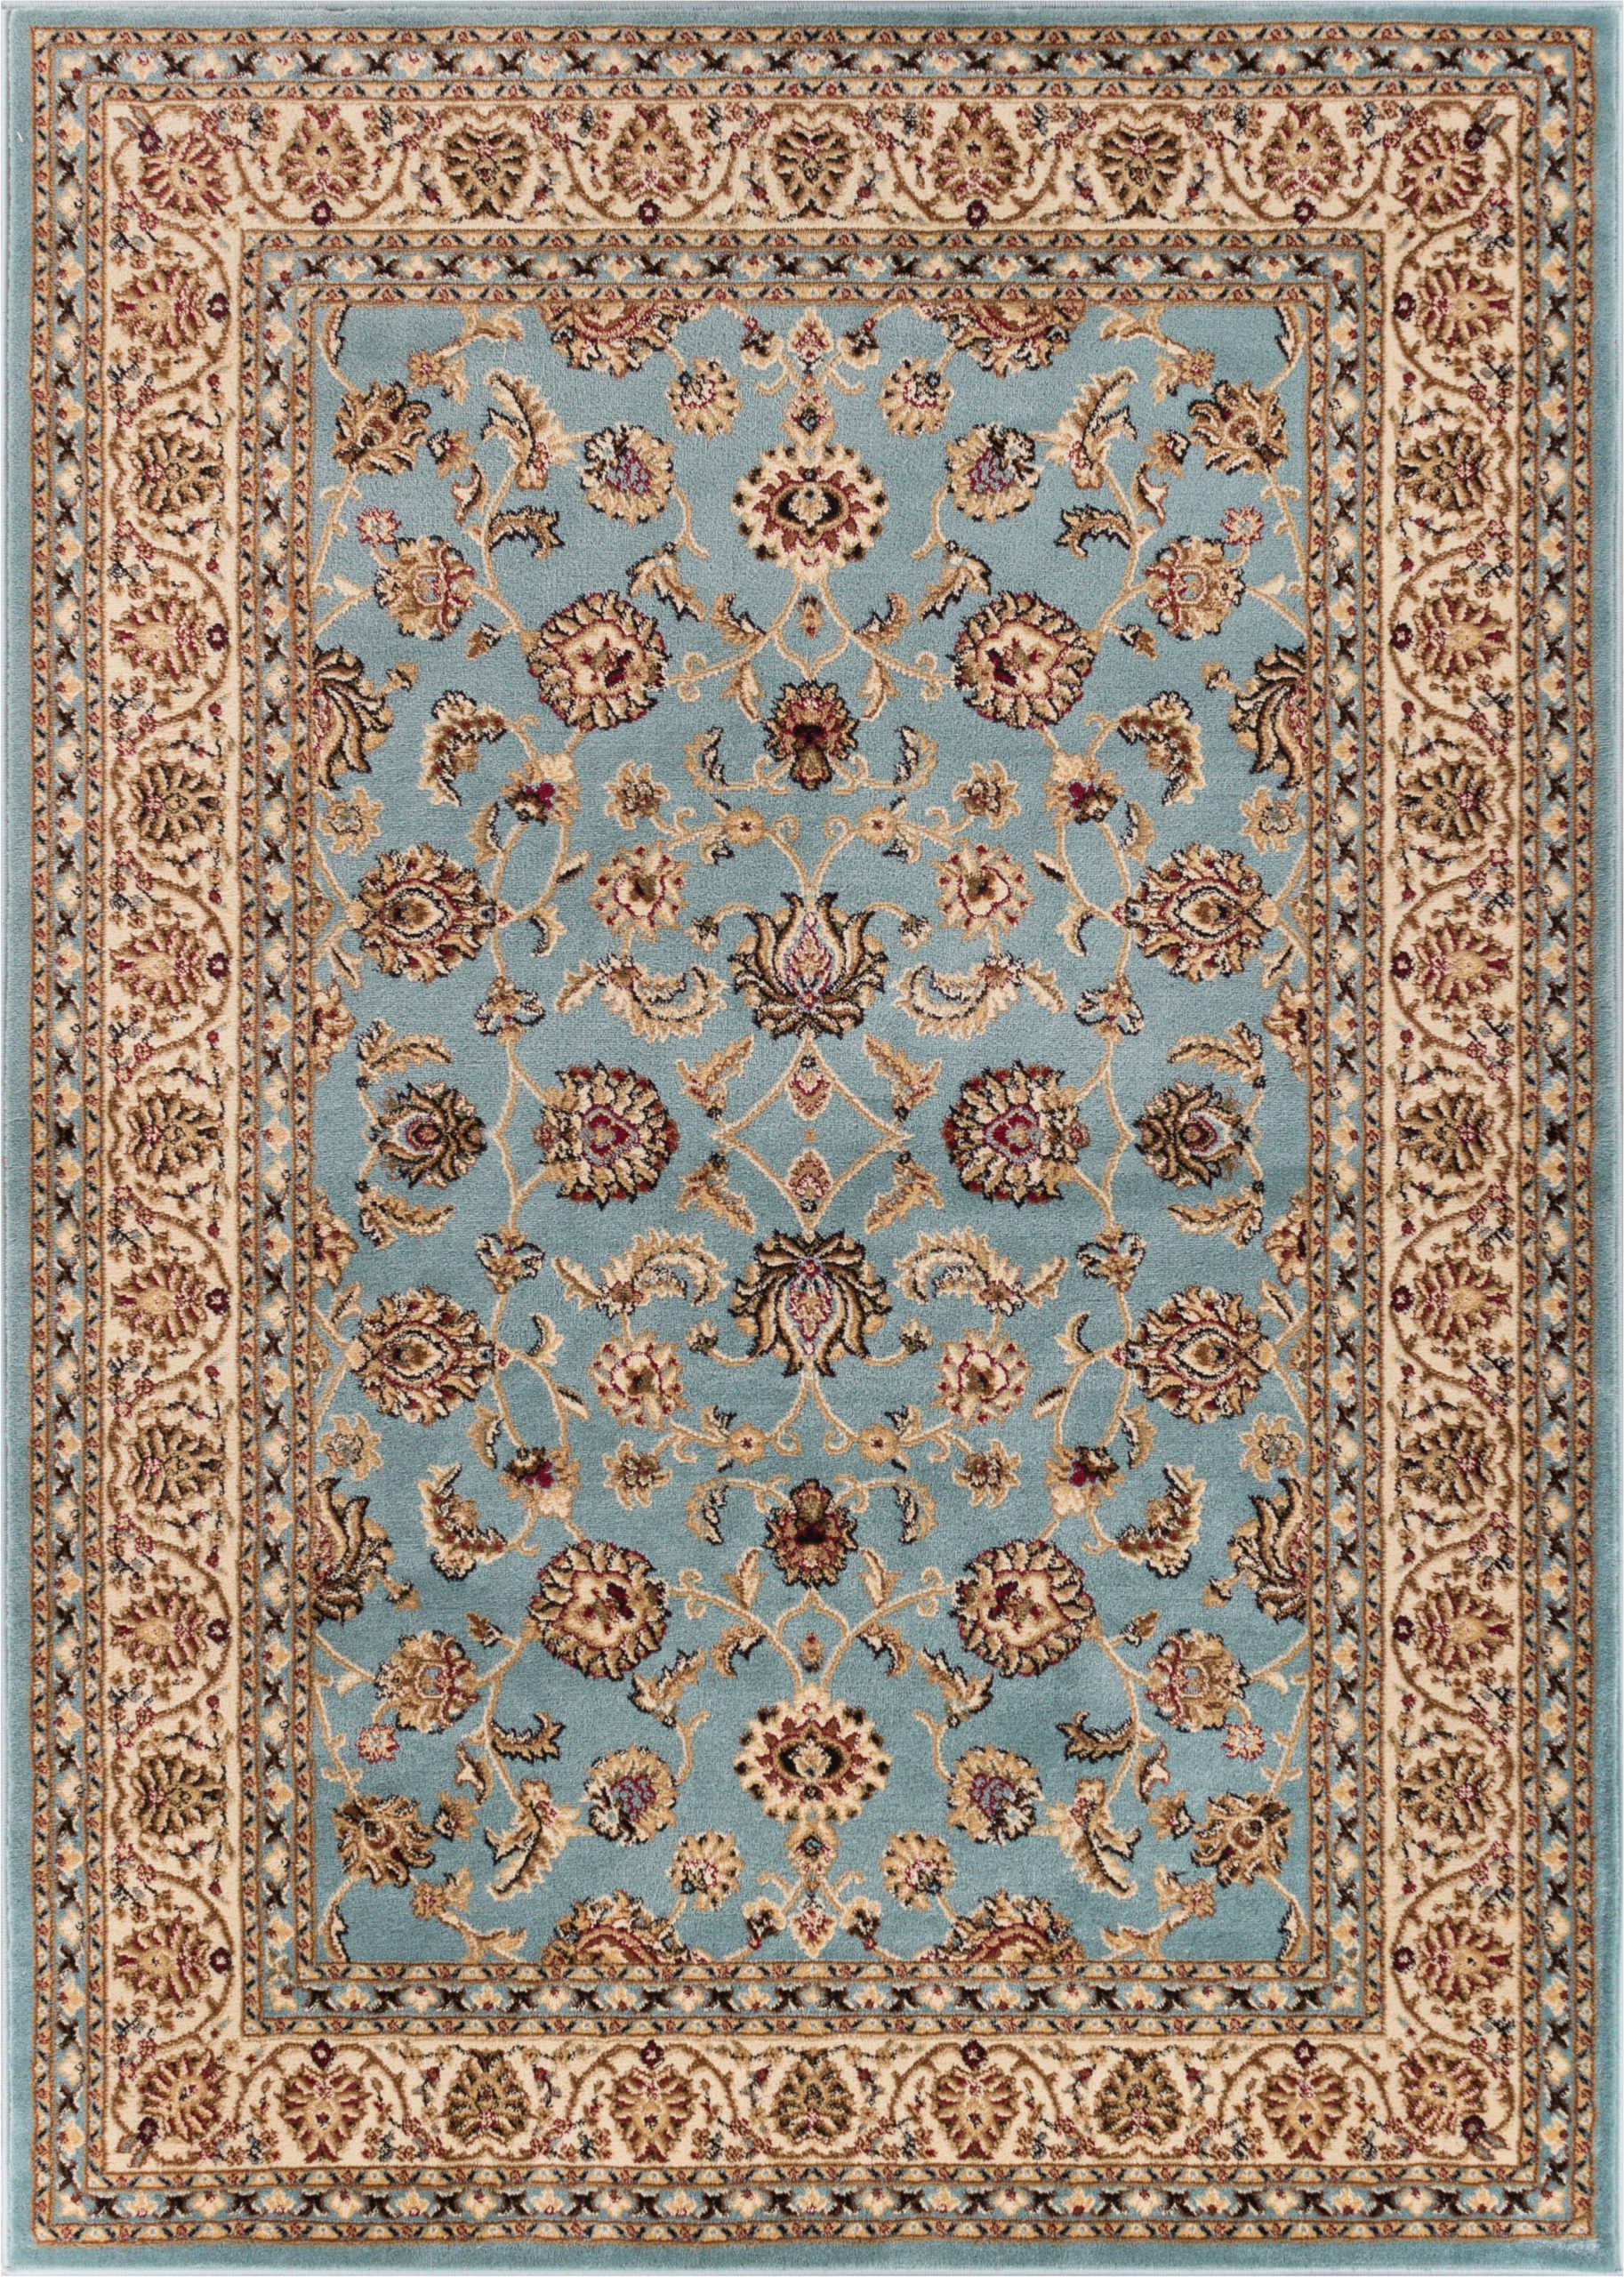 Baby Blue oriental Rug Noble Sarouk Light Blue Persian Floral oriental formal Traditional area Rug